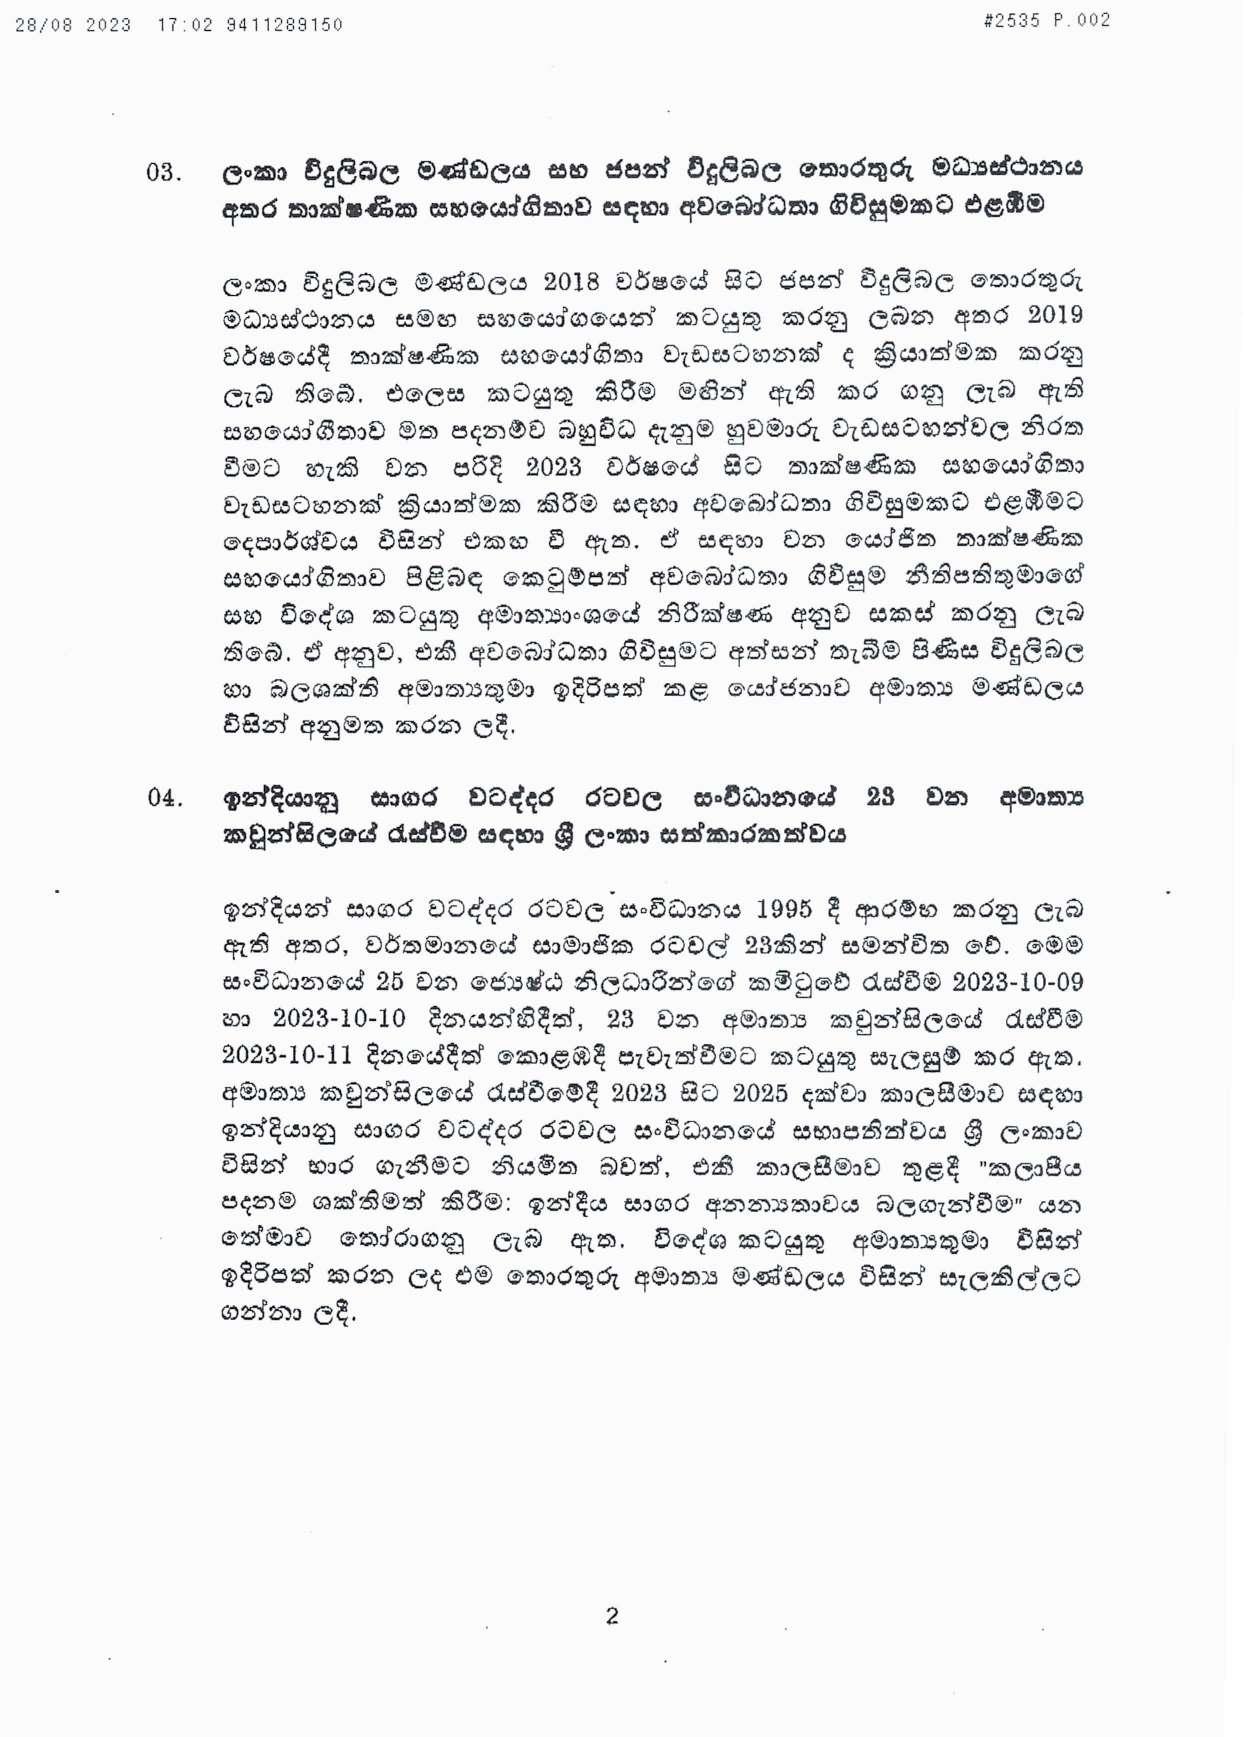 Cabinet Decision on 28.08.2023 page 002